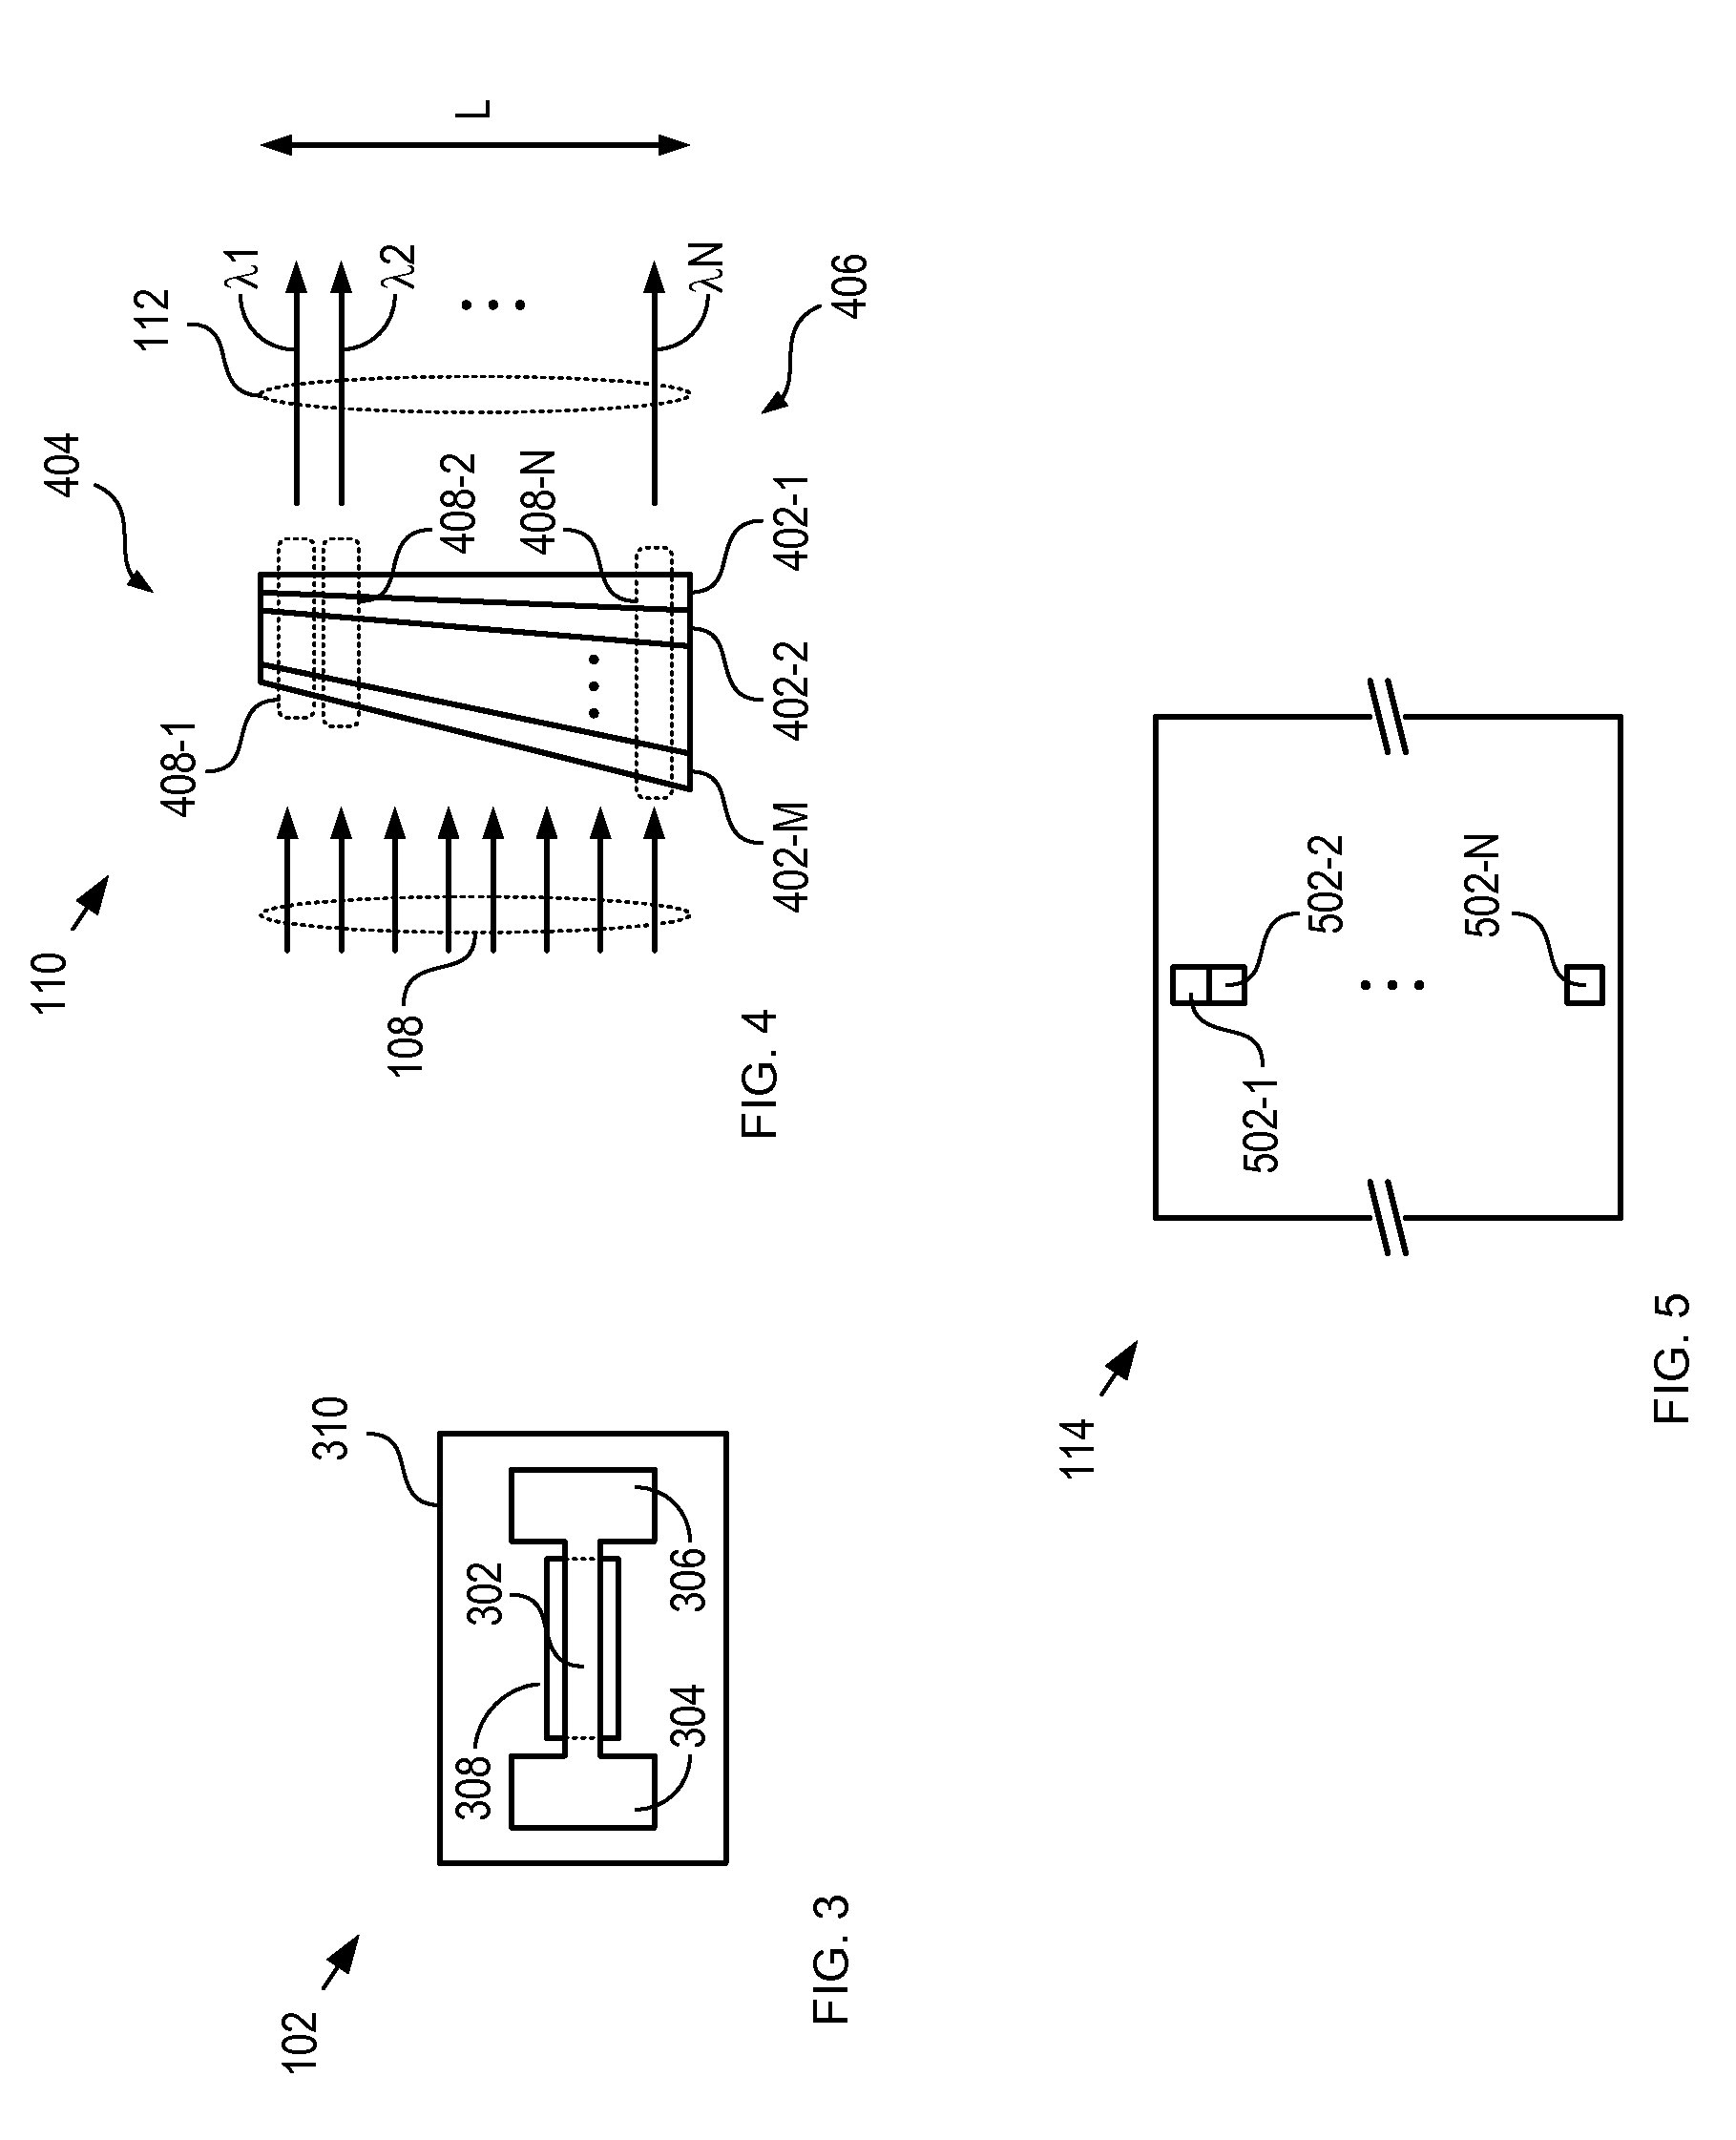 Apparatus and method for detecting and quantifying analytes in solution